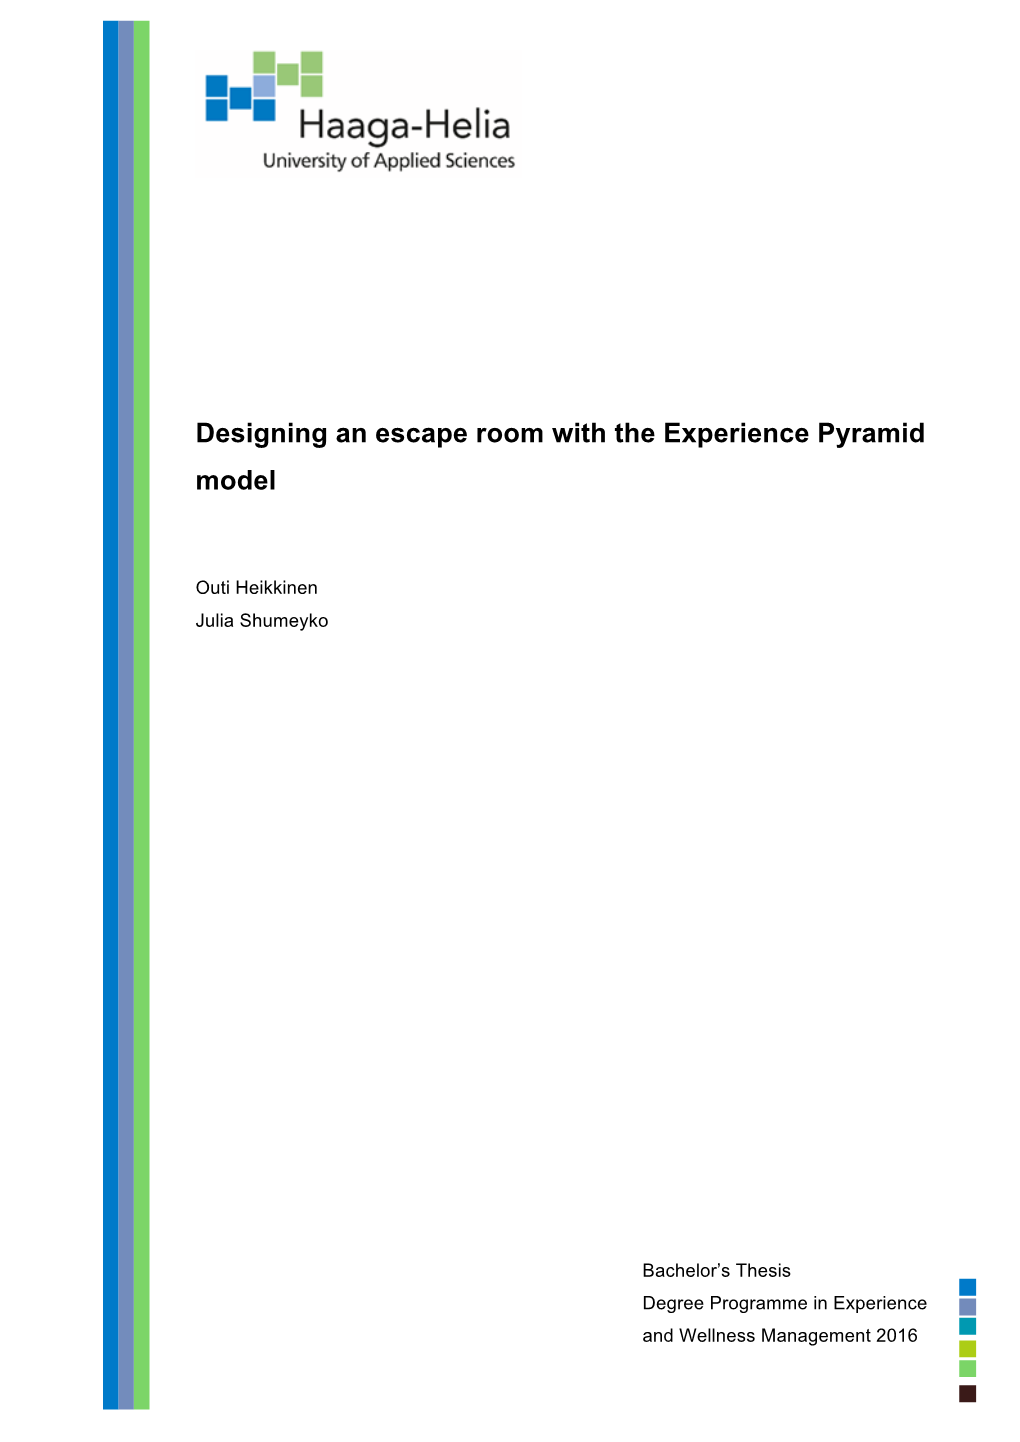 Designing an Escape Room with the Experience Pyramid Model